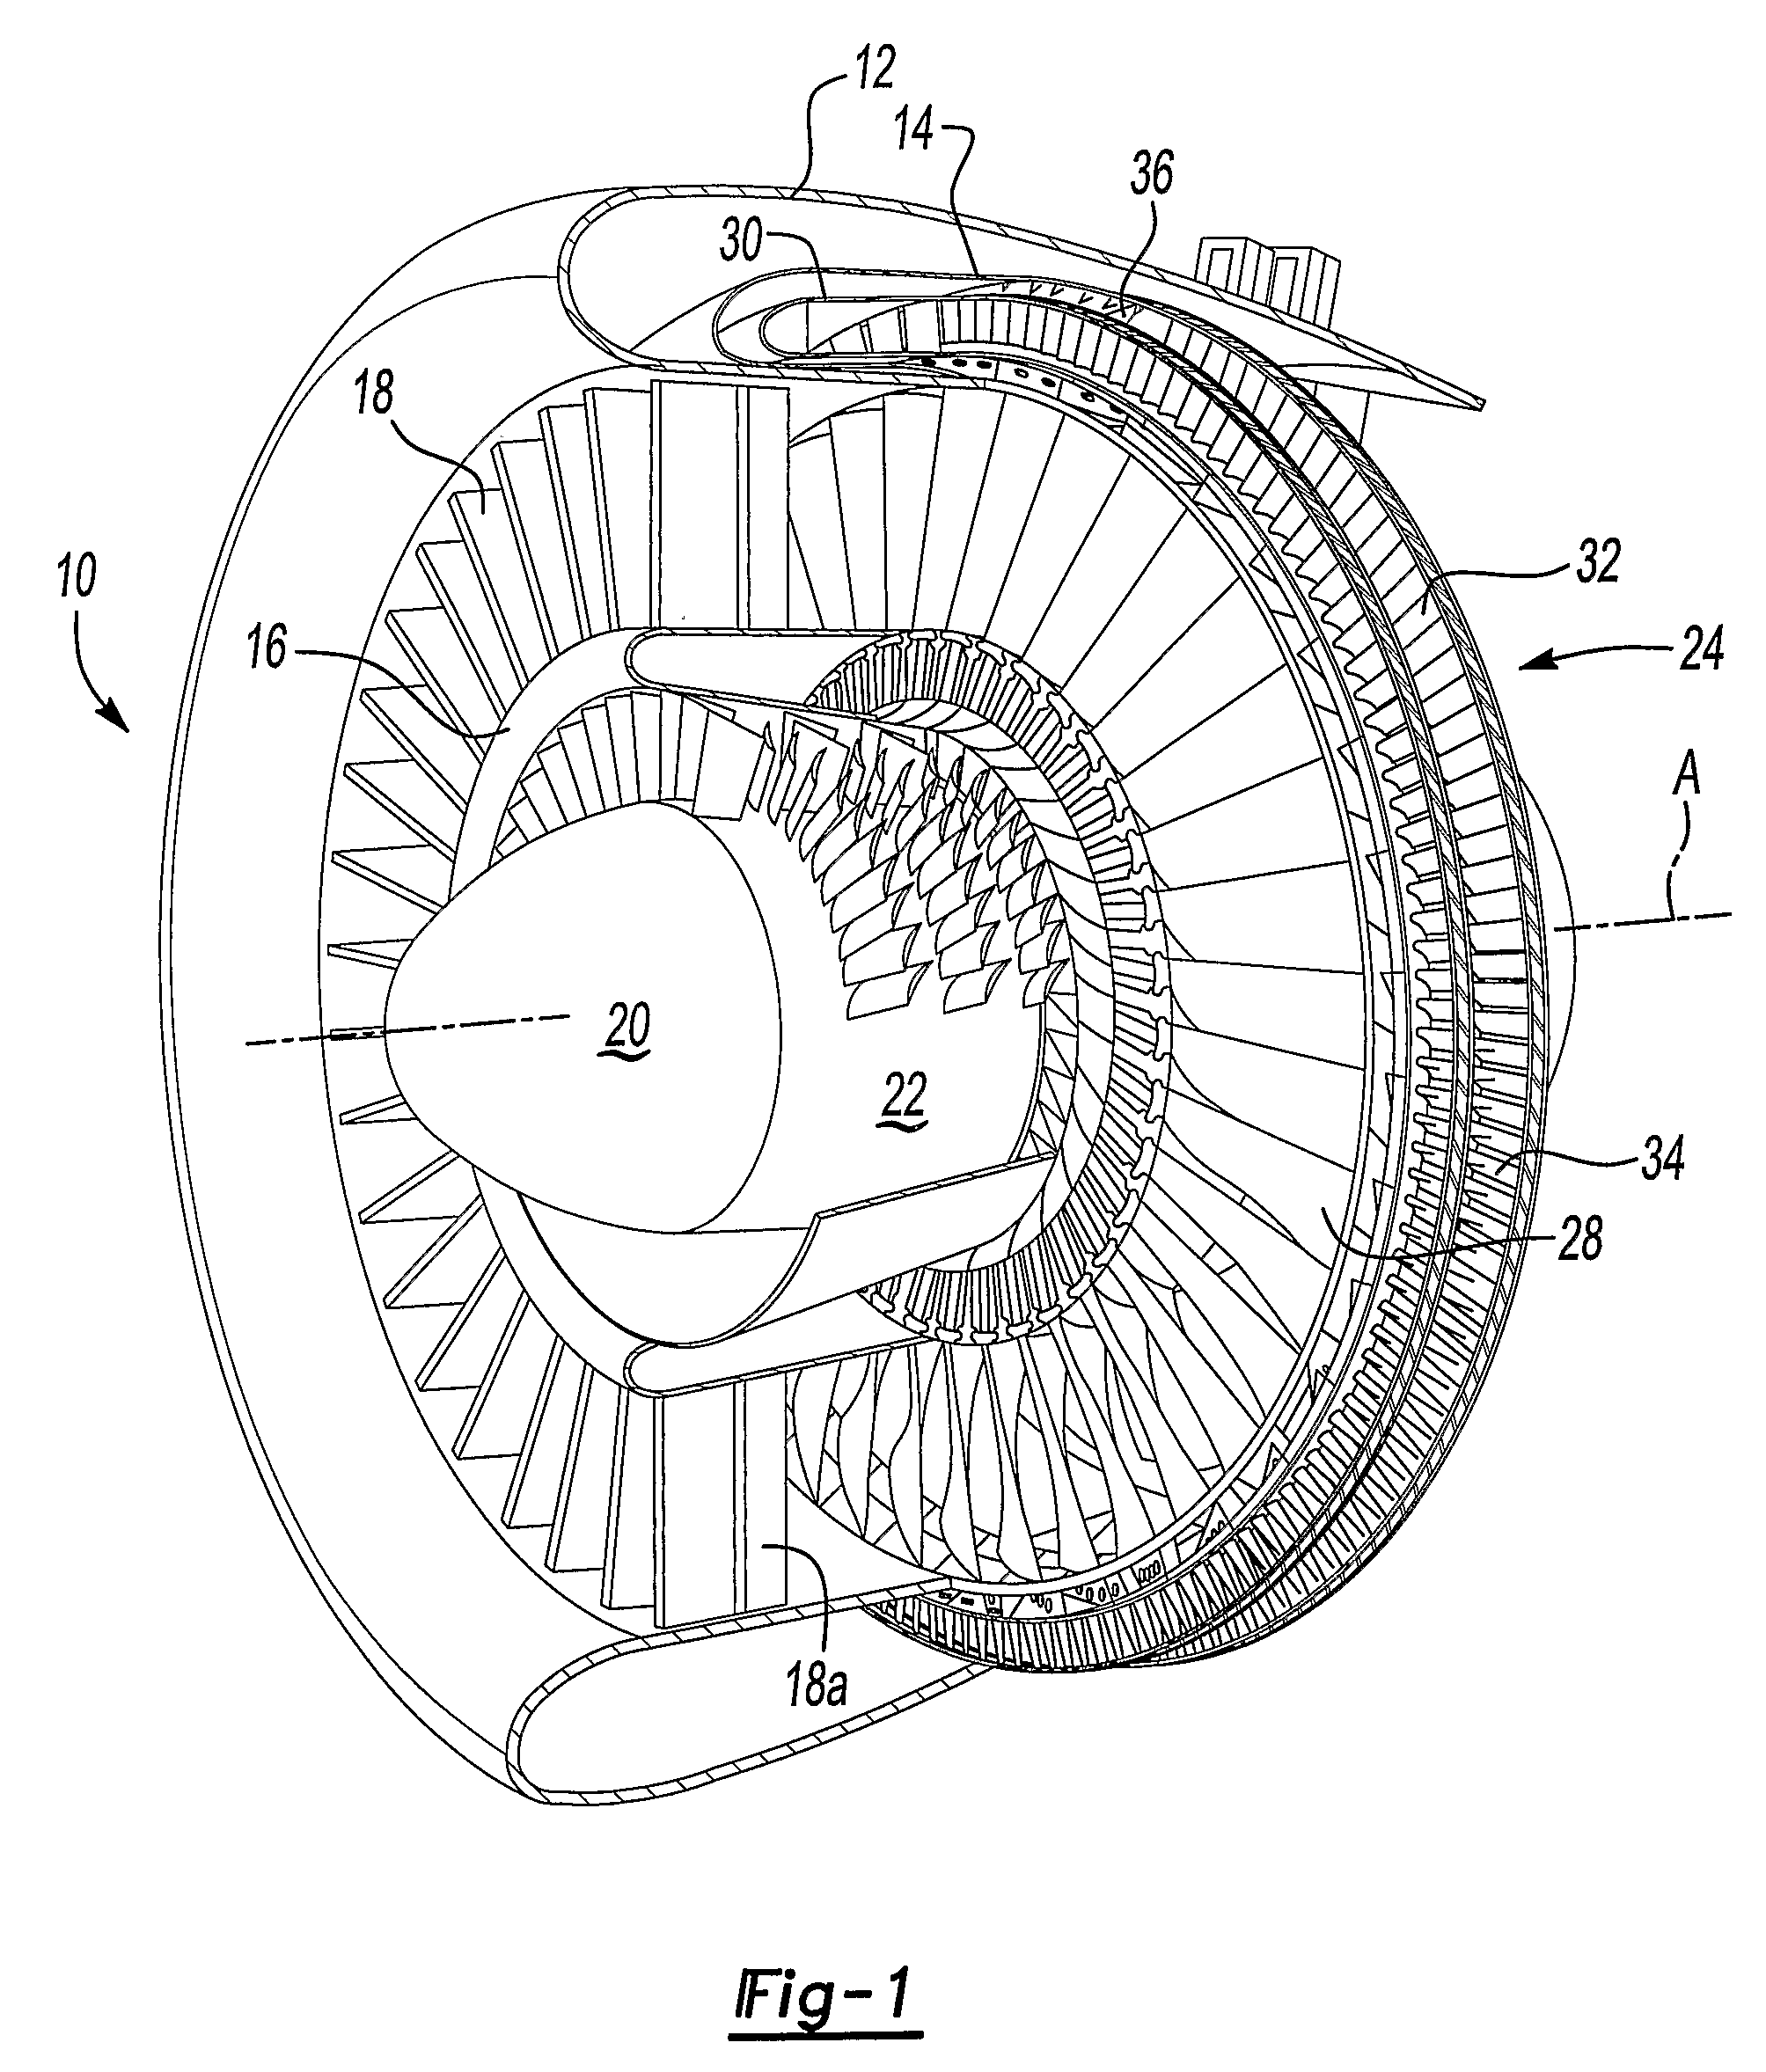 Tip turbine engine comprising turbine clusters and radial attachment lock arrangement therefor